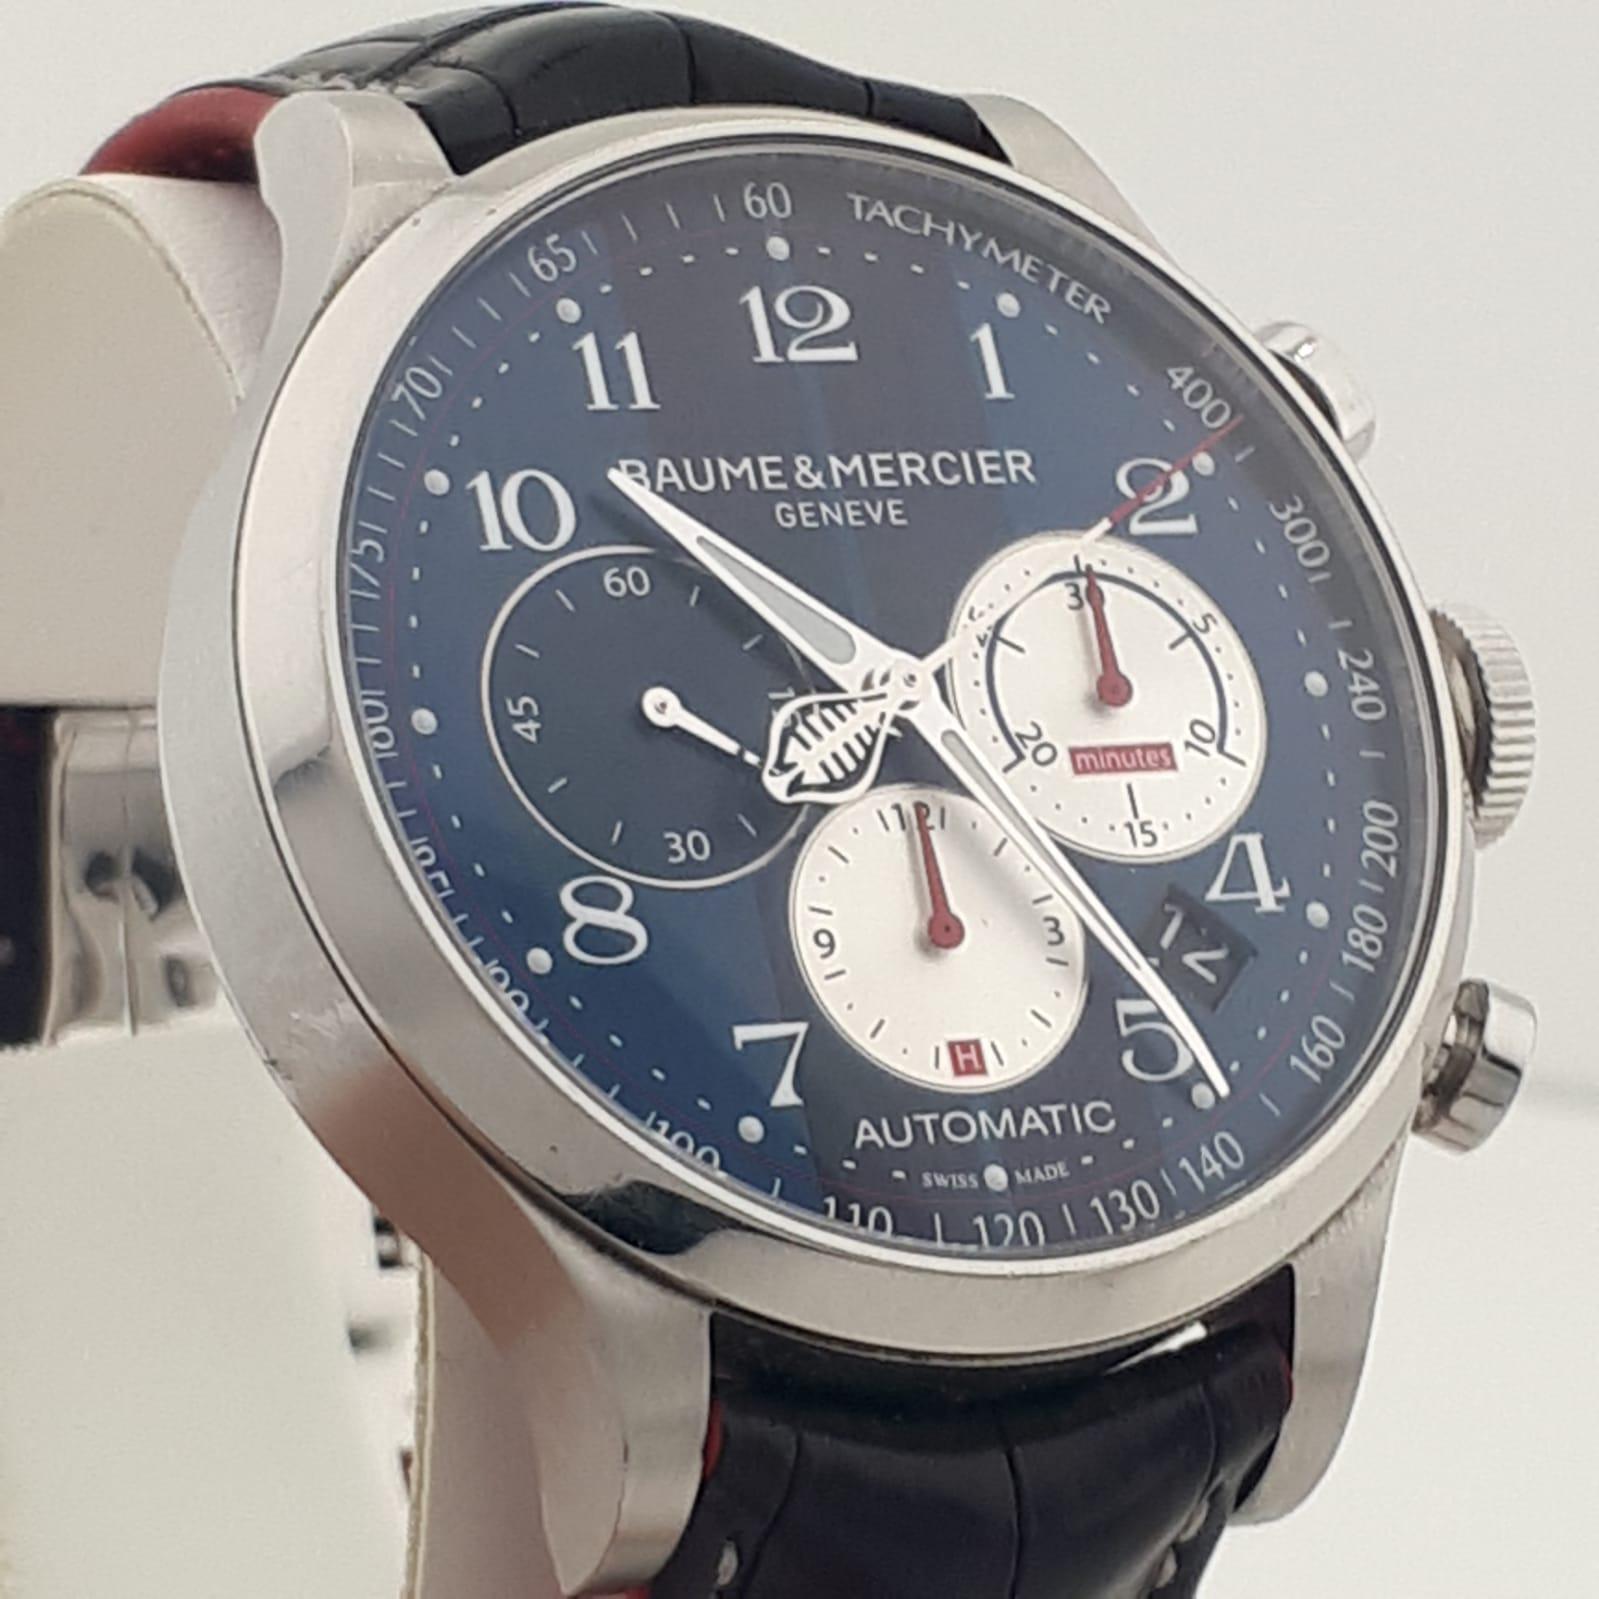 **** Blue Dial, Automatic , 44mm, Original Box

Brand: Baume & Mercier (Guaranteed Authentic)
Model:Capeland Shelby Cobra
Gender: Men's
Metal: Steel
Case Size: 44mm excluding winding crown
Wrist Size: This watch will currently fit a wrist up to